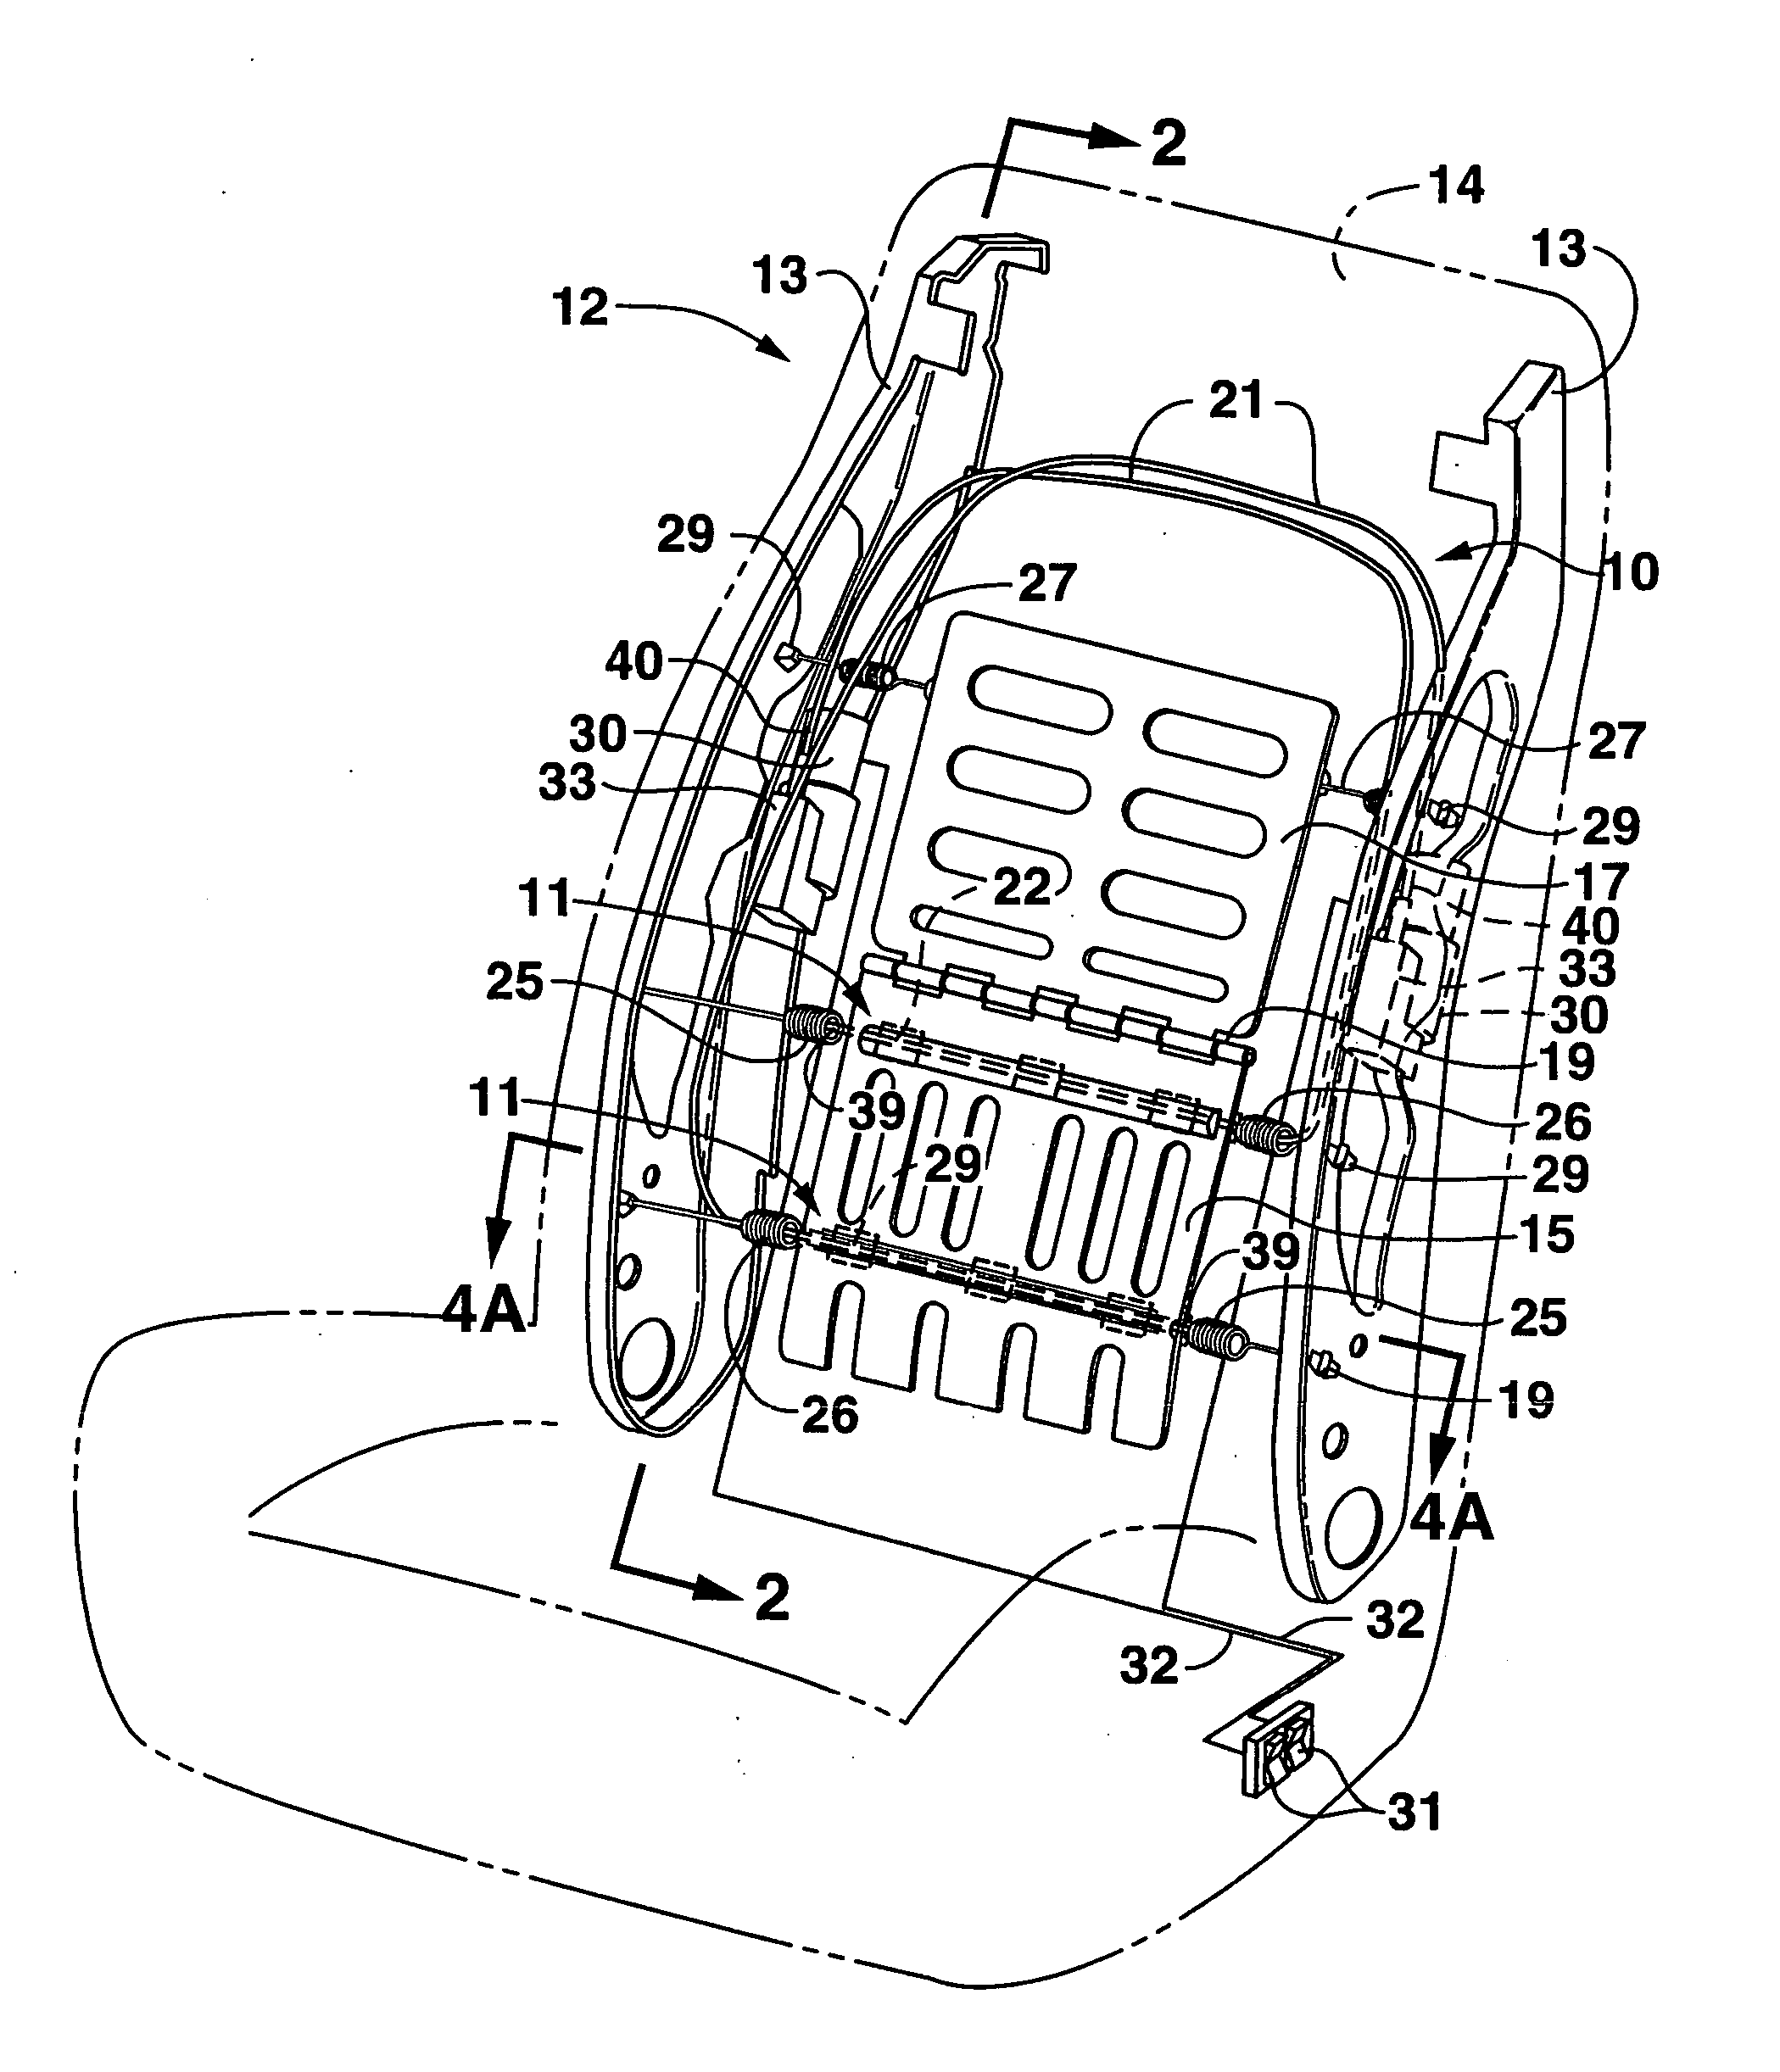 Adjustable lumbar support with extensive configurability